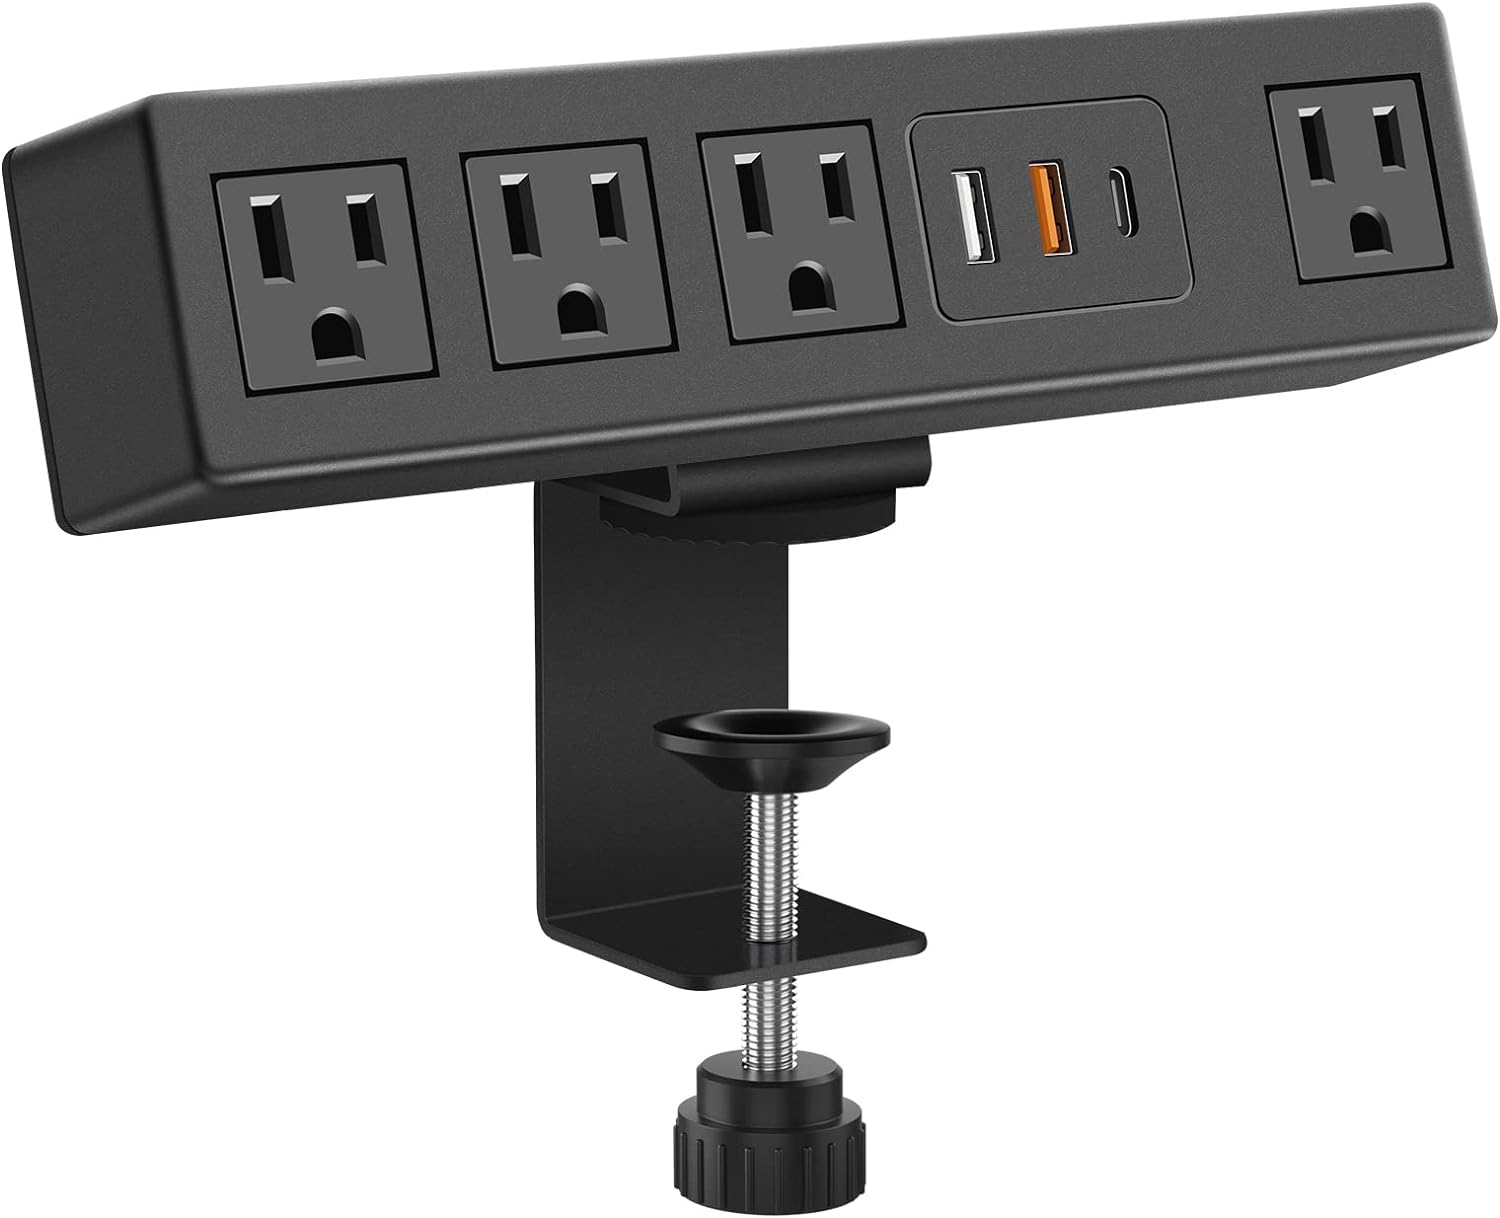 CCCEI Desk Clamp Power Strip with USB-A and USB-C Ports, Desktop Mount Surge Protector 1200J, Widely Spaced Desk Outlet Station, Fast Charging, 6 FT Flat Plug, Fit 1.9 inch Tabletop Edge. (Black)